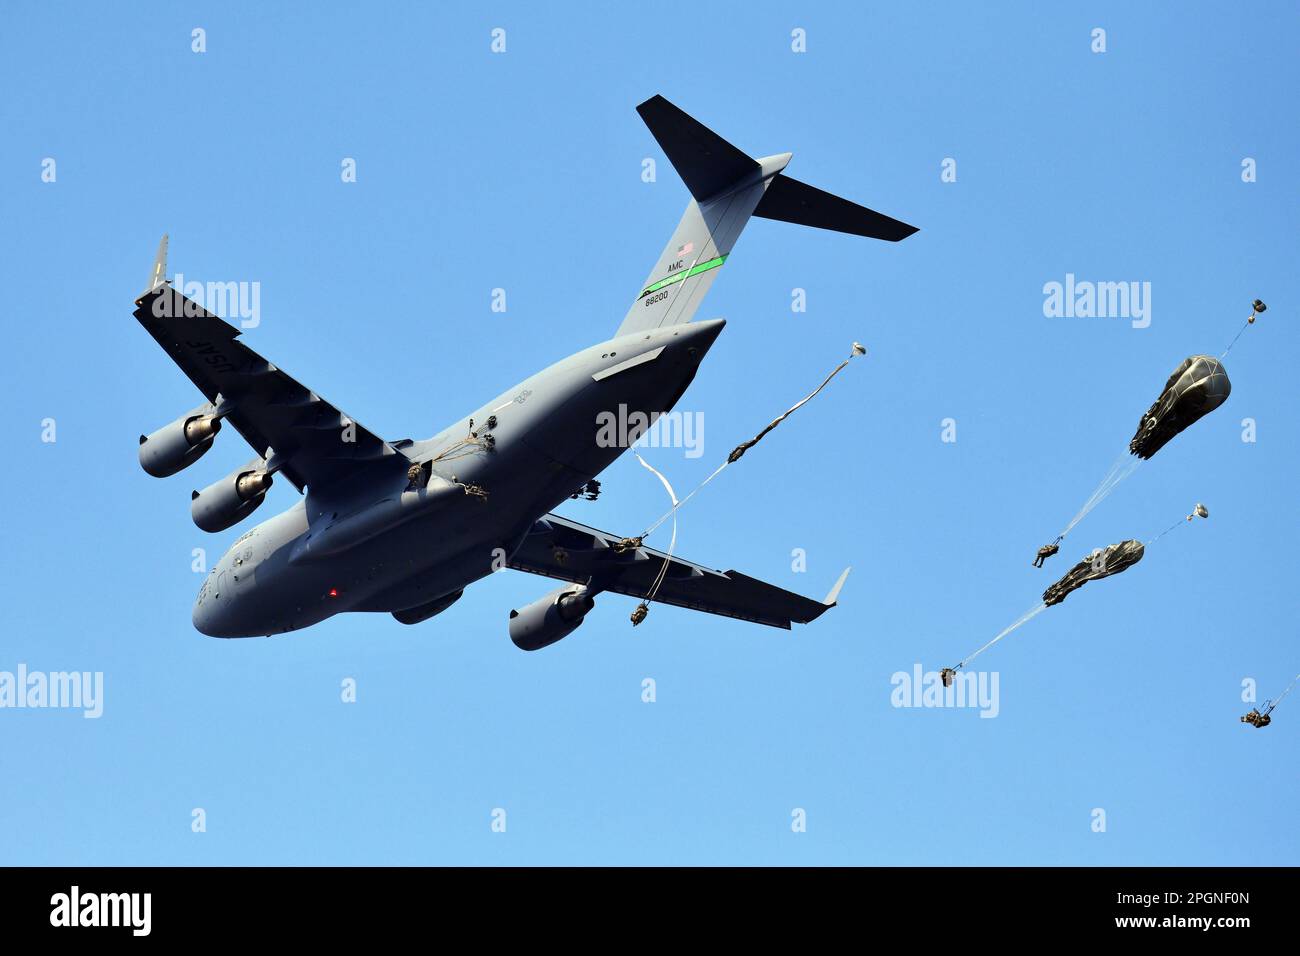 US Army Paratroopers assigned to 2nd Battalion, 503rd Parachute Infantry Regiment, 173rd Airborne Brigade, descend onto Juliet Drope Zone, after exiting a C-17 from 446th Airlift Wing during an airborne operation in commemoration of the 20th anniversary of Operation Northern Delay, Pordenone, Italy on March 22, 2023. Operation Northern Delay occurred on 26 March 2003 as part of the 2003 invasion of Iraq. It involved dropping 1,000 paratroopers from the 173rd Airborne Brigade into Northern Iraq. It was the last large-scale combat parachute operation conducted by the U.S. military since Operatio Stock Photo